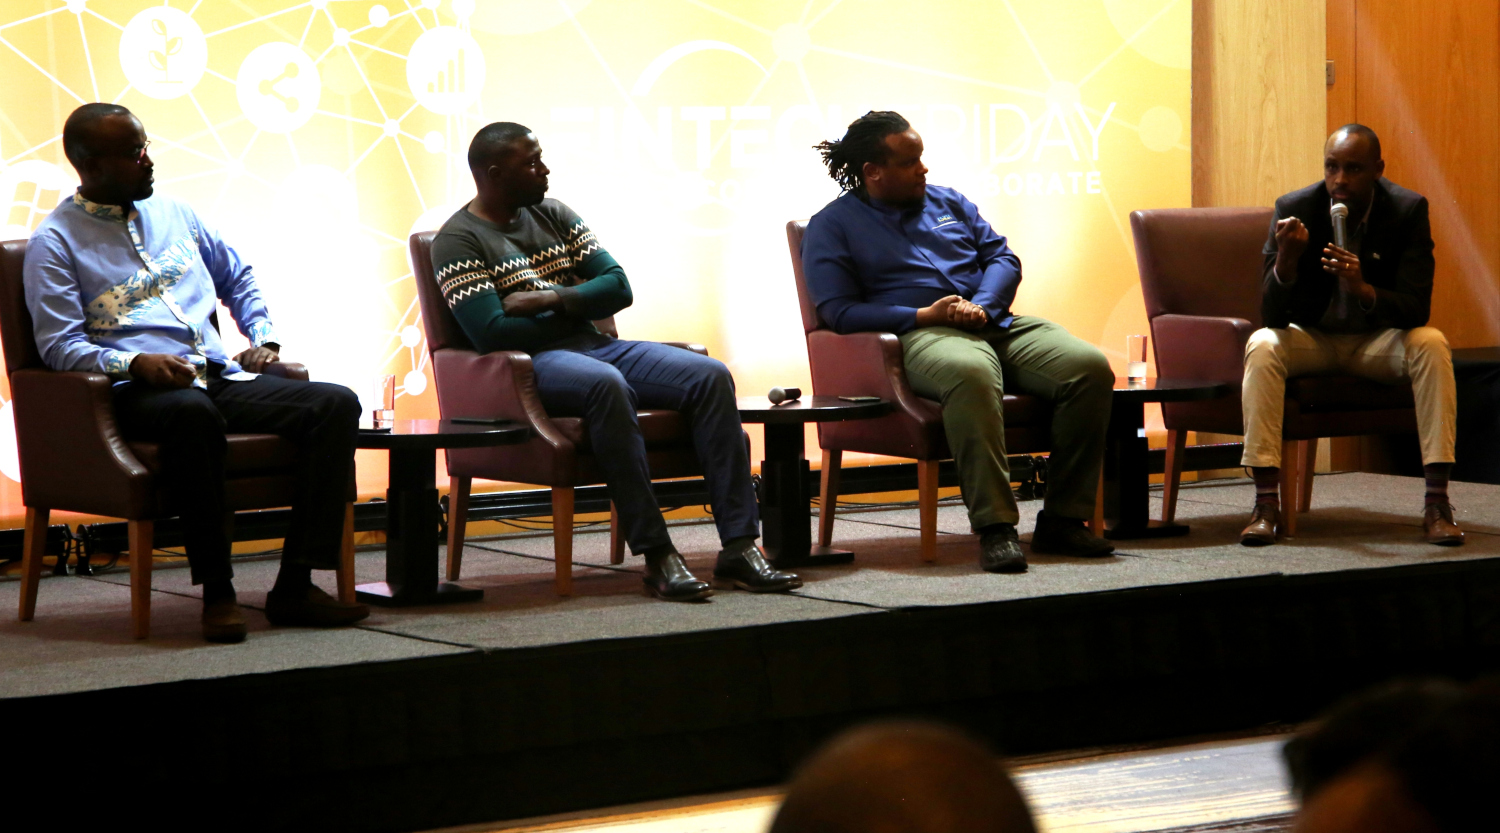 L-R: CEO of R-switch, Jean-Claude Gaga, Fiacre Mushimire, a senior manager at RURA,  Innocent Kaneza, a consultant of ESICIA Ltd, Innocent Muhizi, CEO of RISA during a panel discussion on  interoperability. / Craish Bahizi